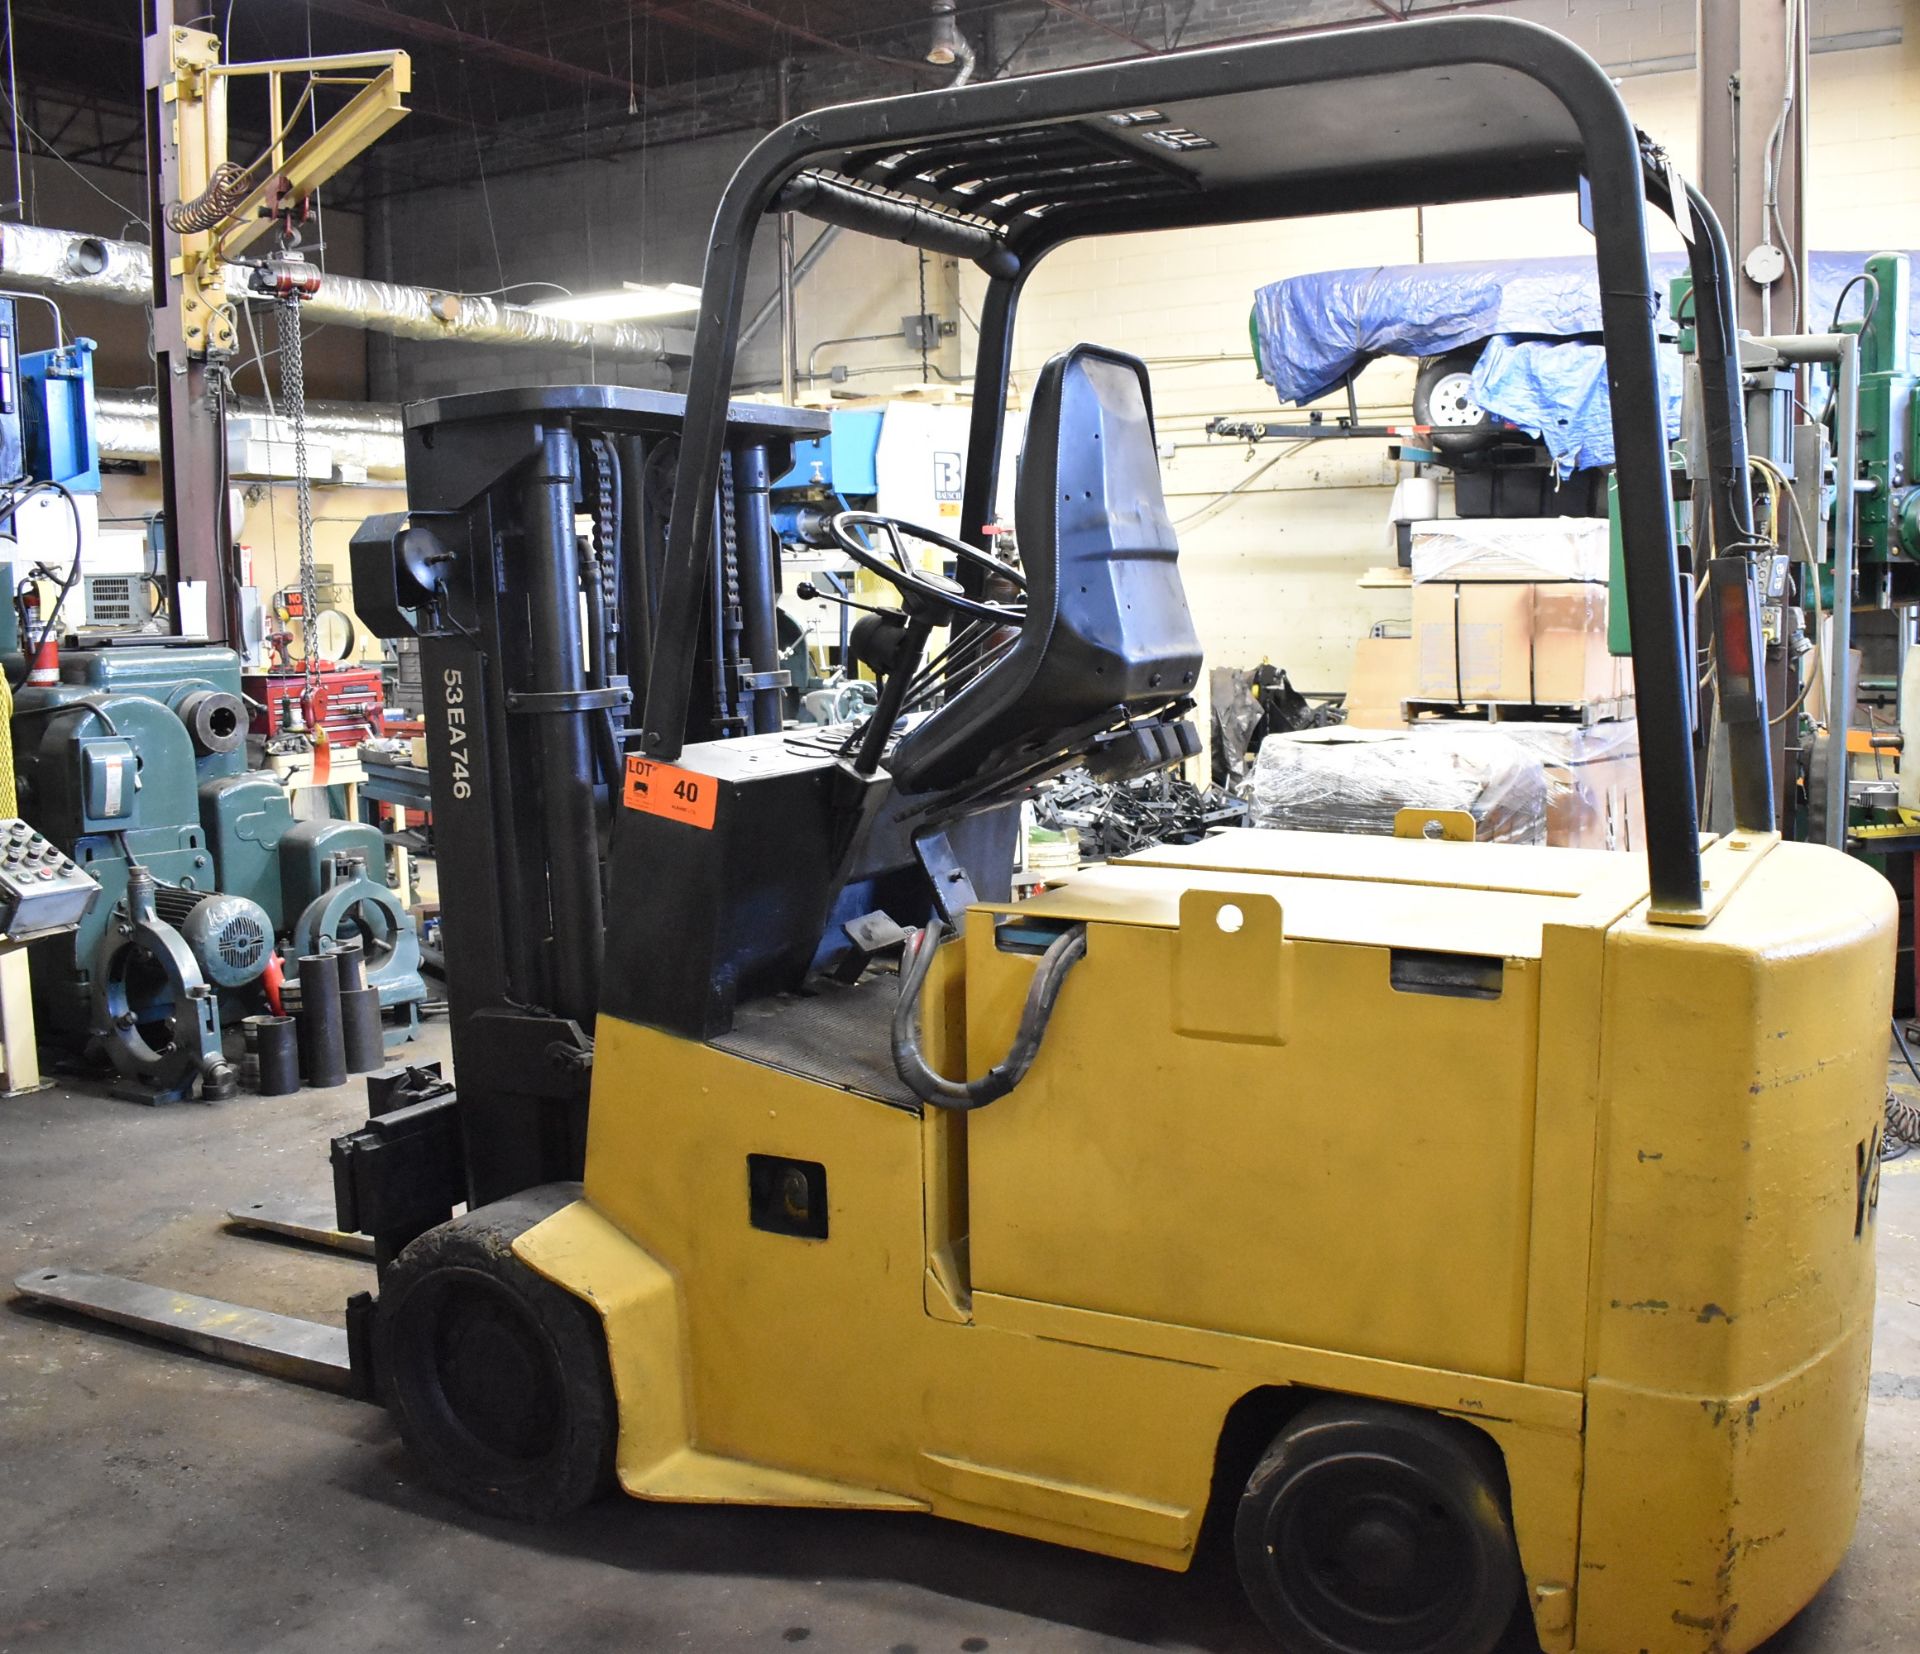 YALE ERC080HBN36SE075SR 36V ELECTRIC FORKLIFT WITH 8000LB CAPACITY, 155" MAX. LIFT HEIGHT, 3 STAGE - Image 2 of 5